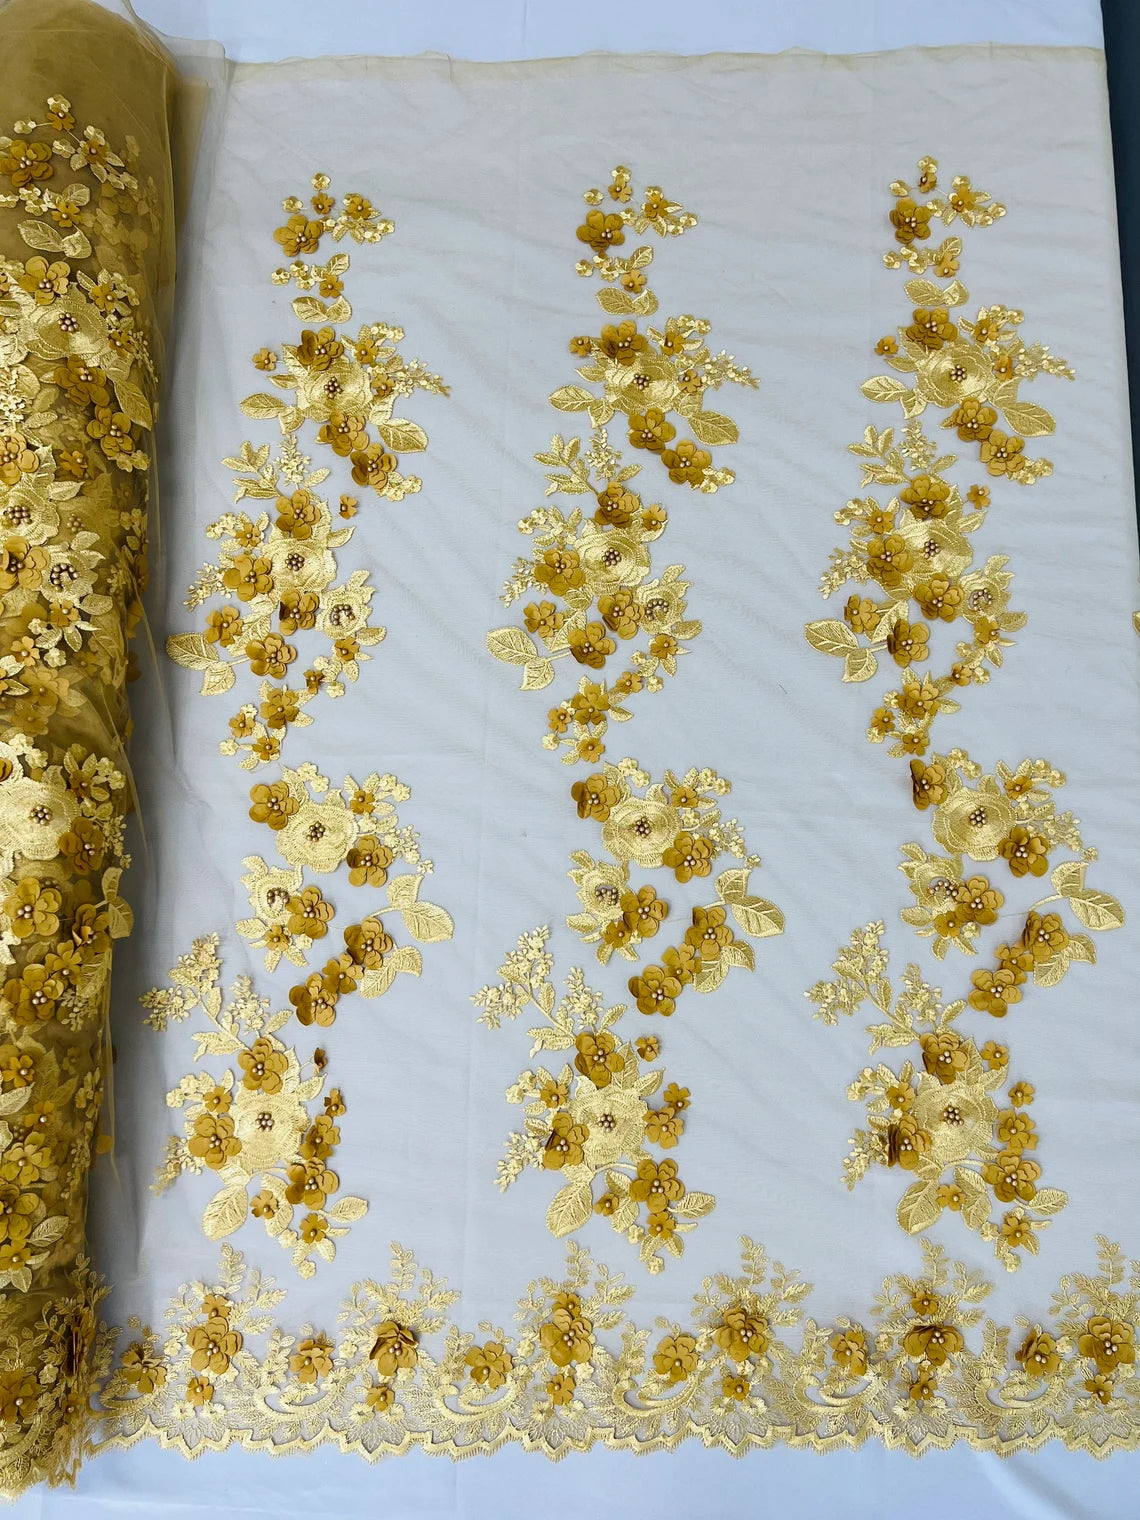 3D Flower Panels Fabric - Gold - Flower Panels Bead Embroidered on Lace Fabric Sold By Yard